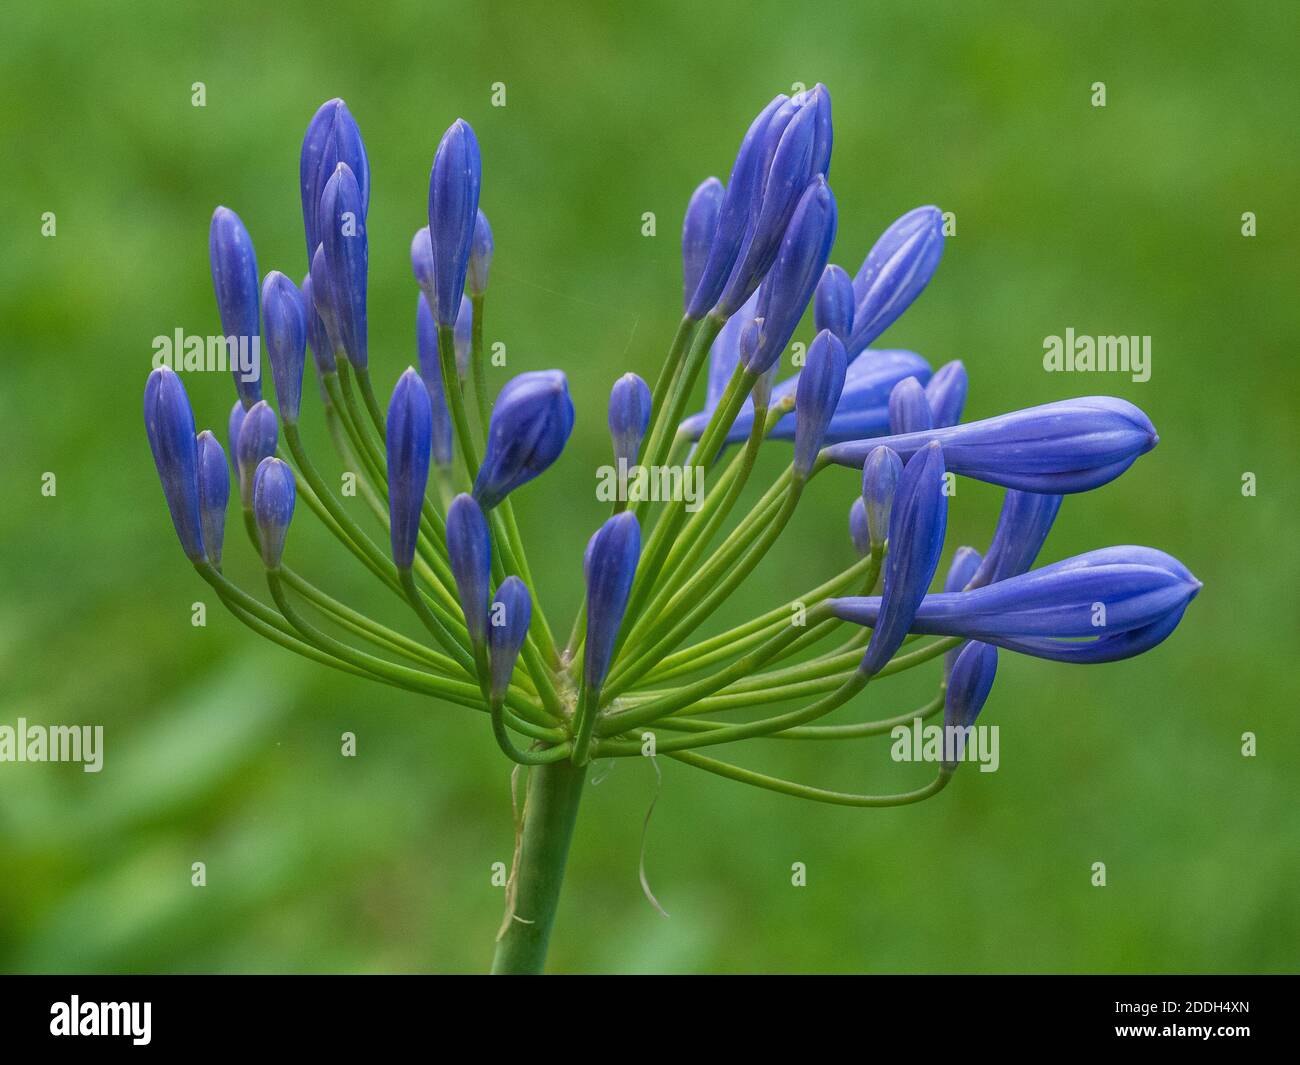 Close-up of Agapanthus flower with green out of focus background Stock Photo